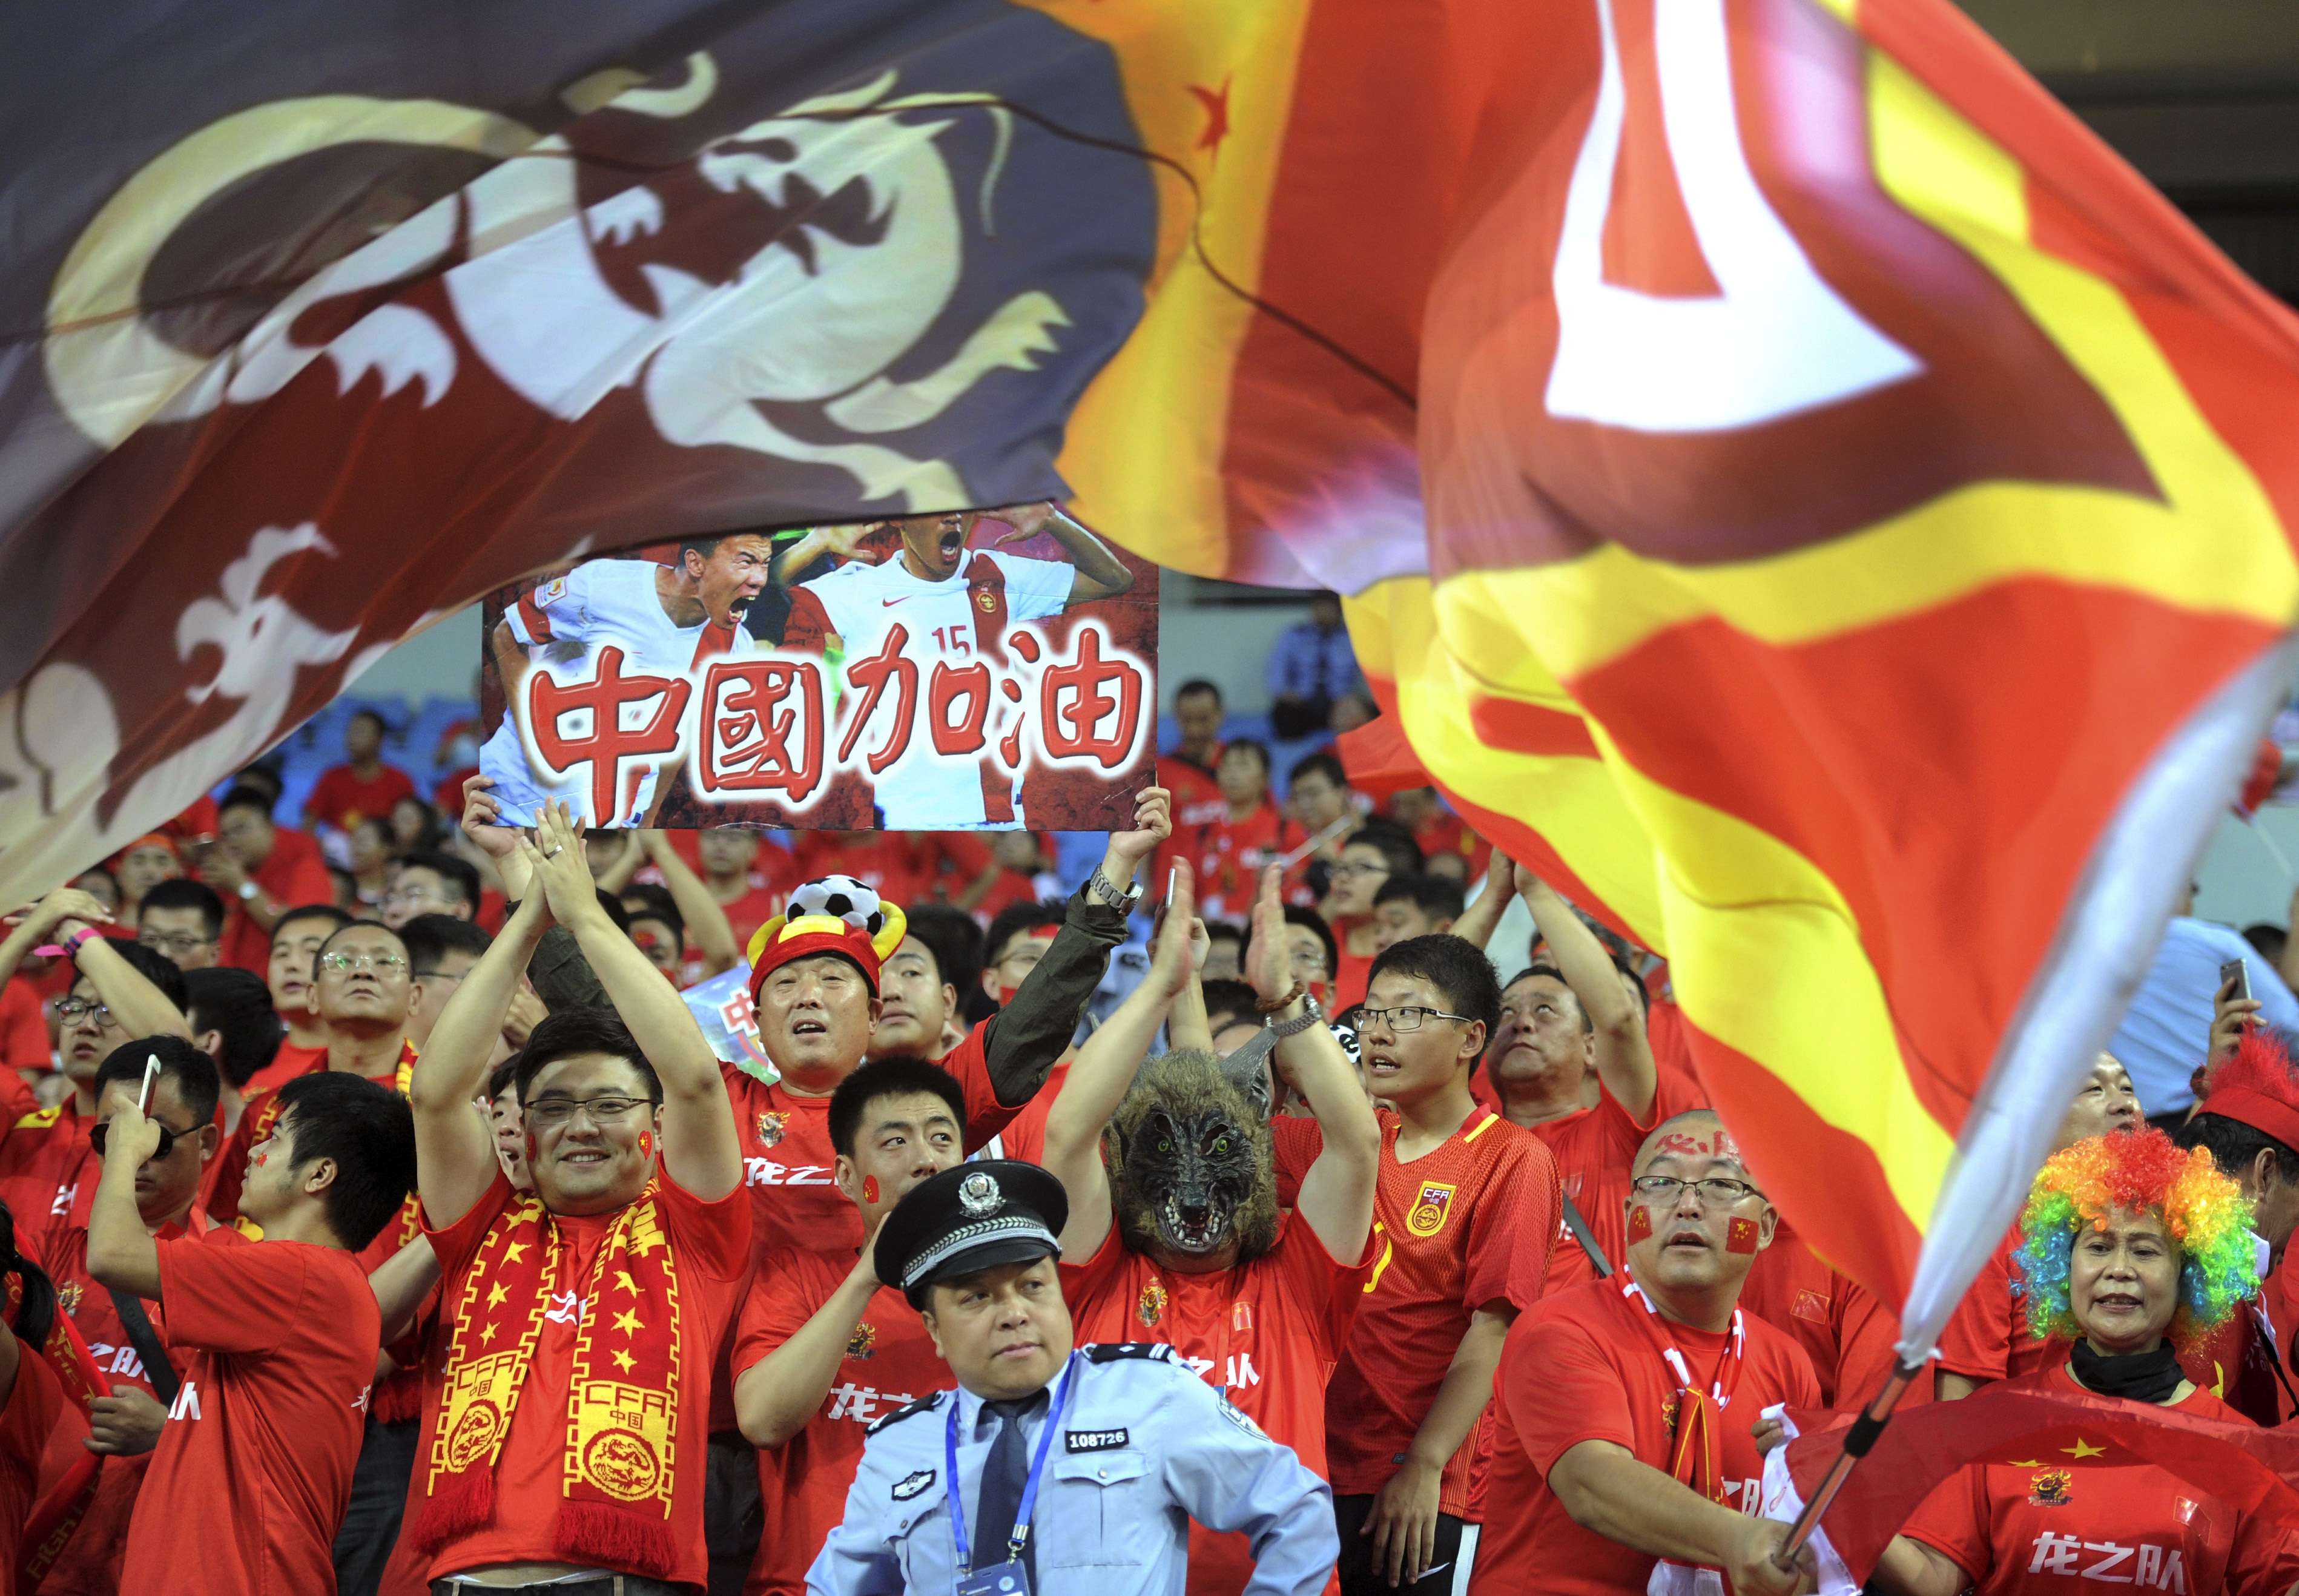 A policeman looks on as Chinese soccer fans cheer during the 2018 World Cup qualifying soccer match between China and Iran held in Shenyang in northeast China's Liaoning province, Tuesday, Sept. 6, 2016. (Color China Photo via AP)